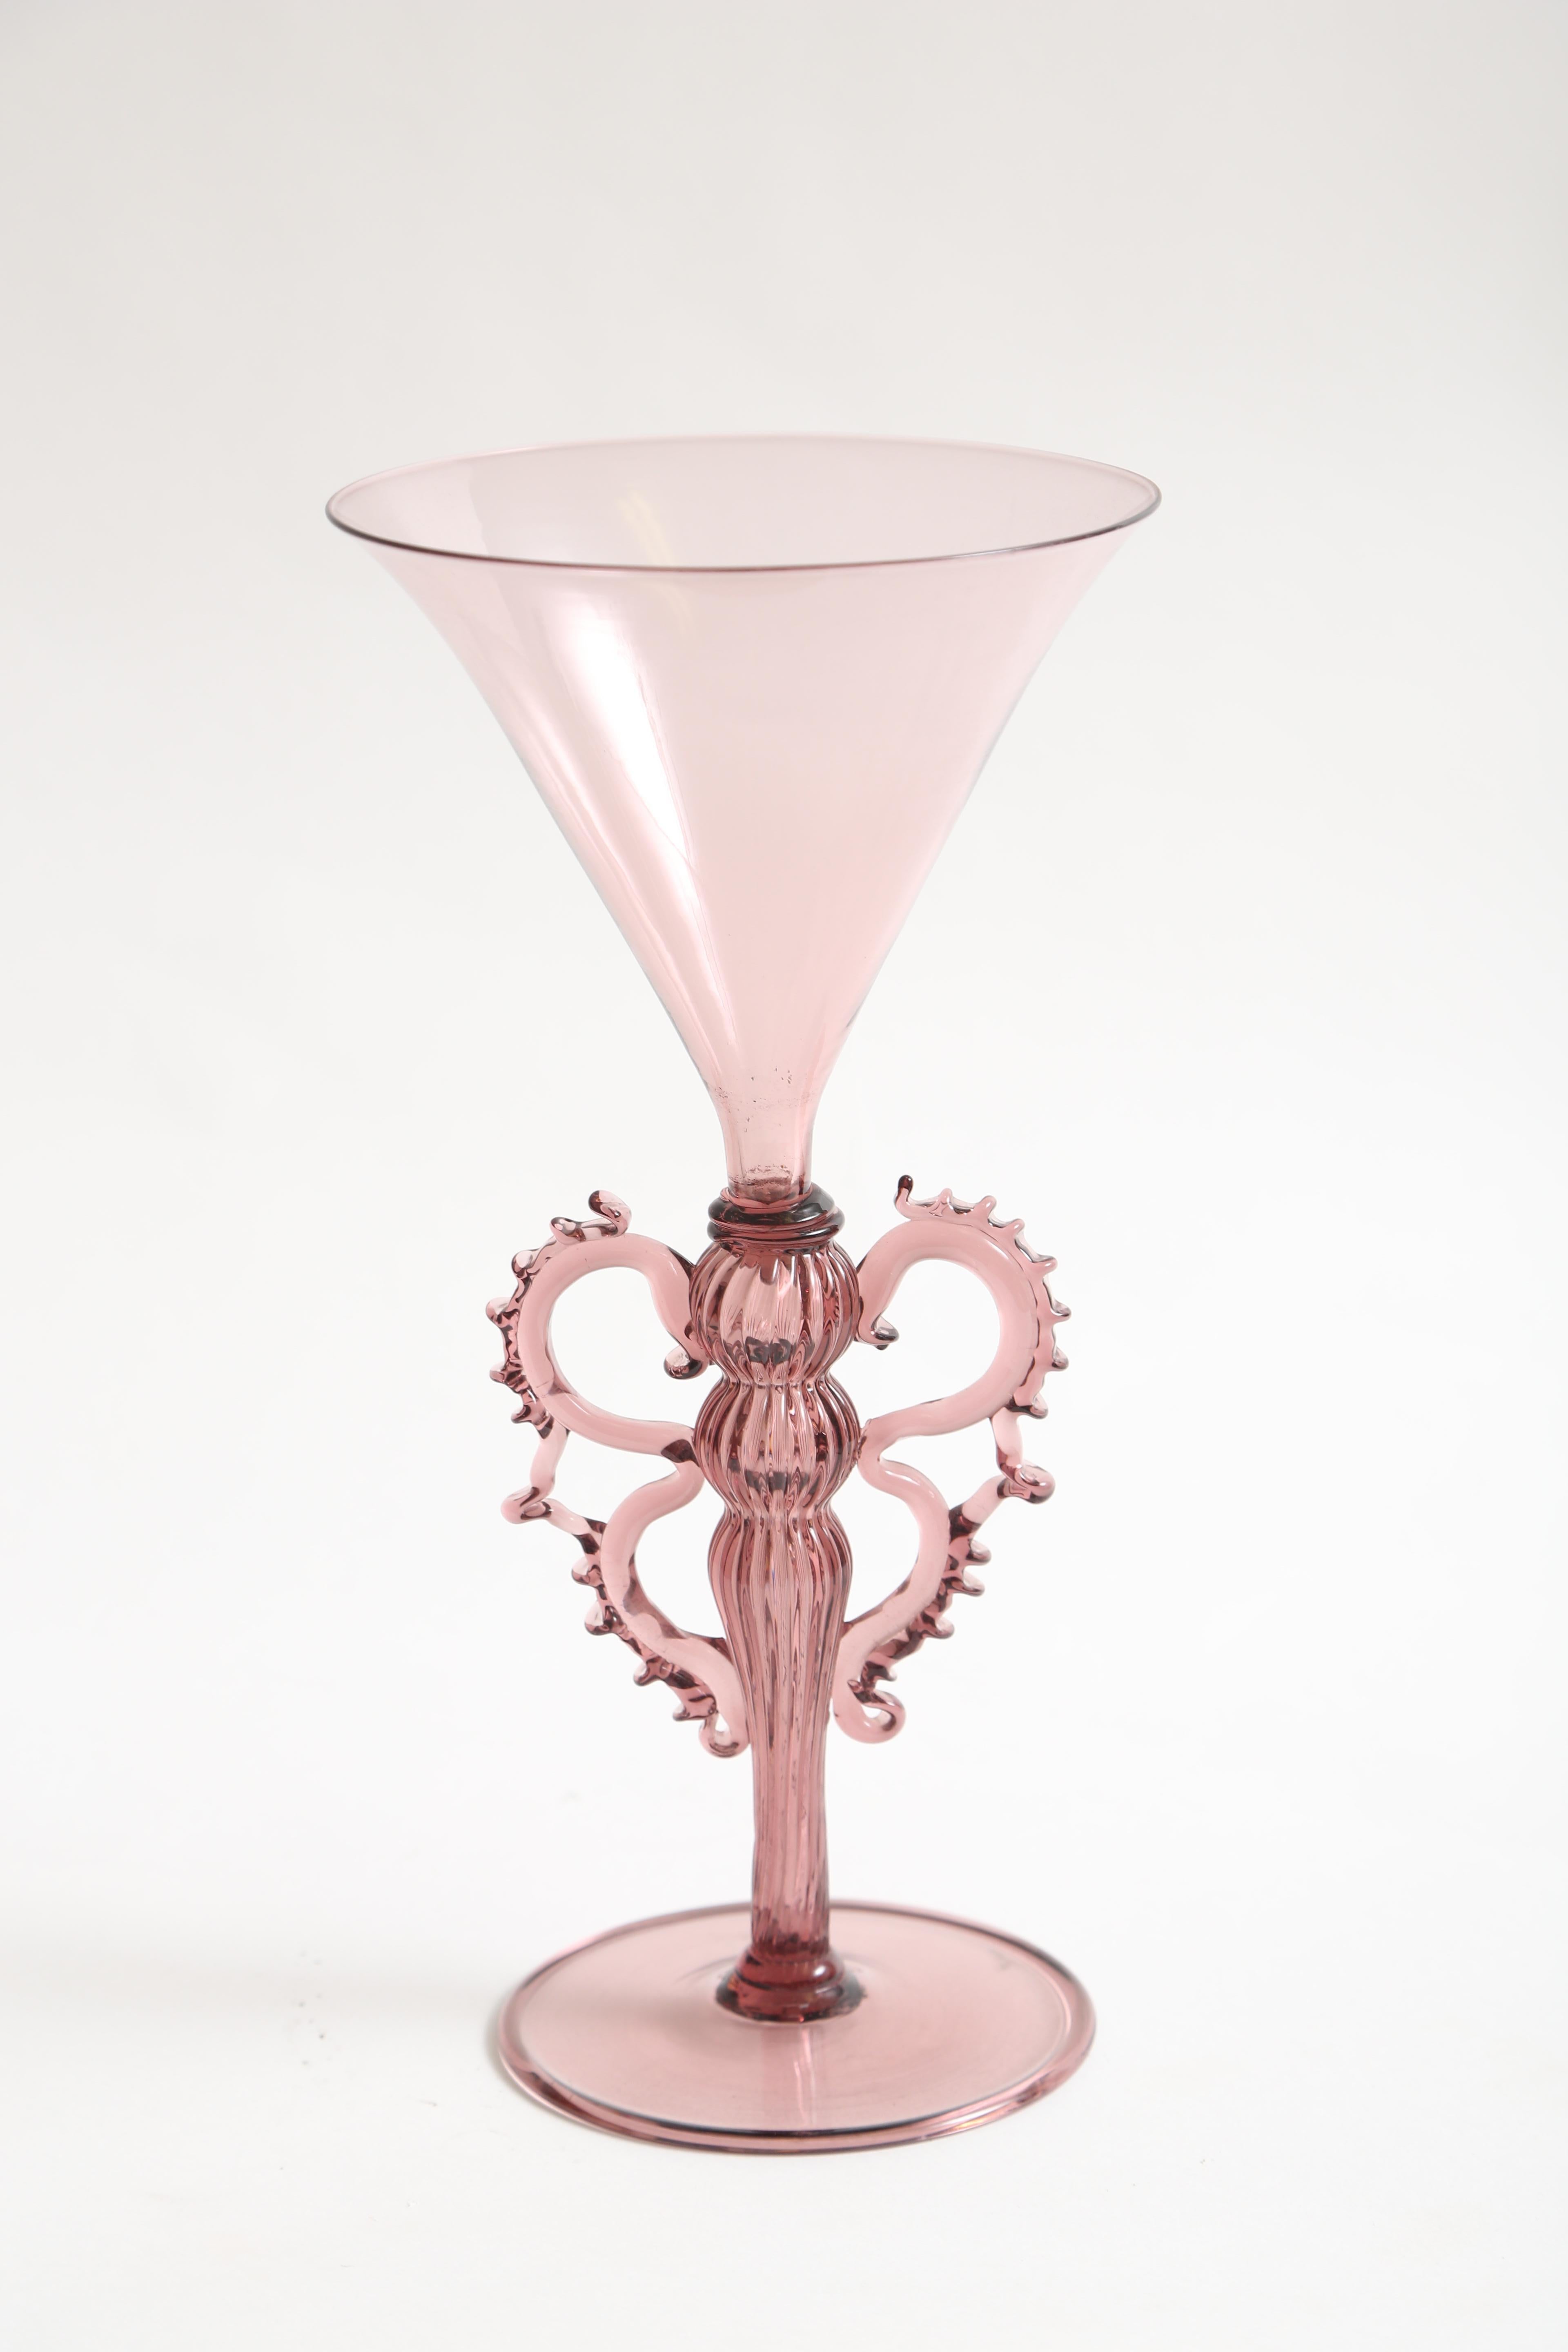 A large chalice form in transparent amethyst -colored glass.
Three-line acid stamp.
Possibly designed by Vittorio Vecchin.